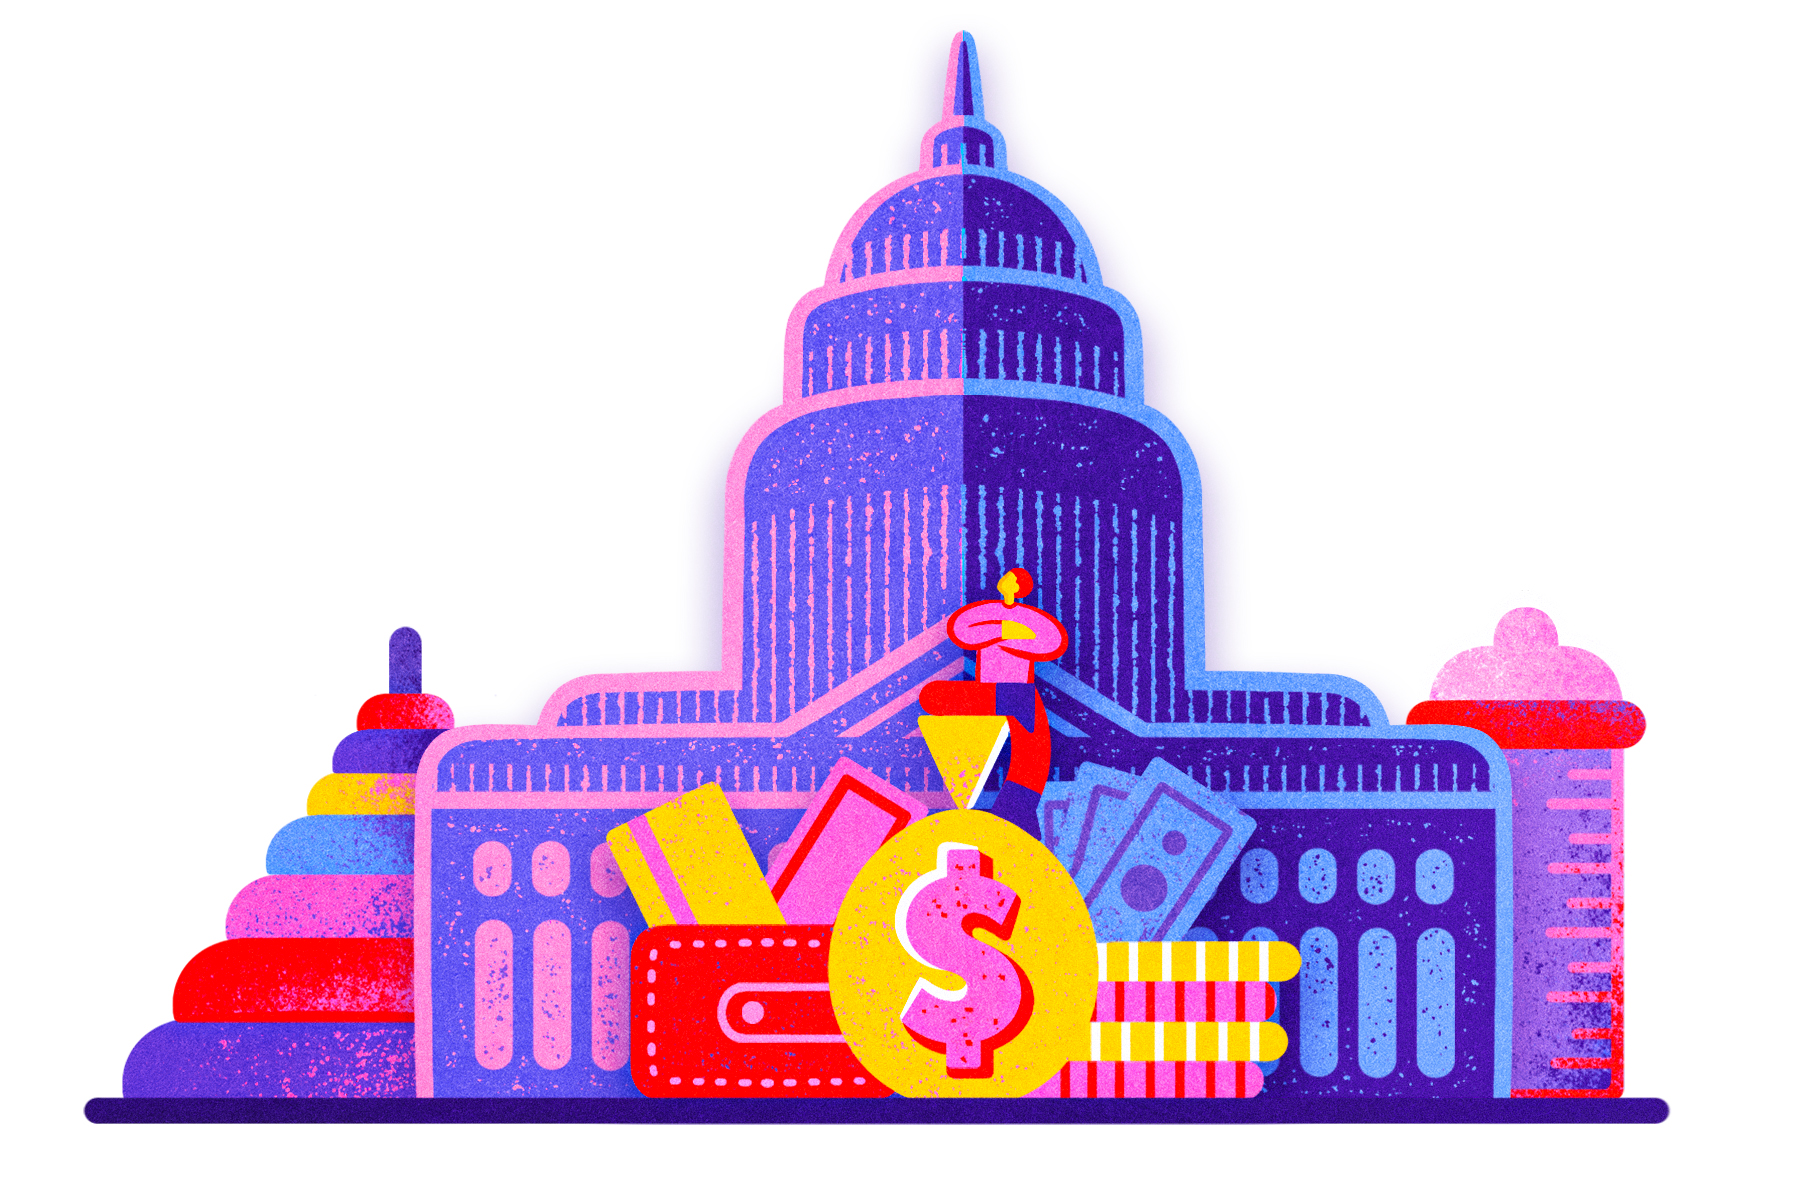 This is an illlustration of the nation's Capitol with a baby bottle, stacking rings alongside a stack of government funds with a neglectful lawmaker.